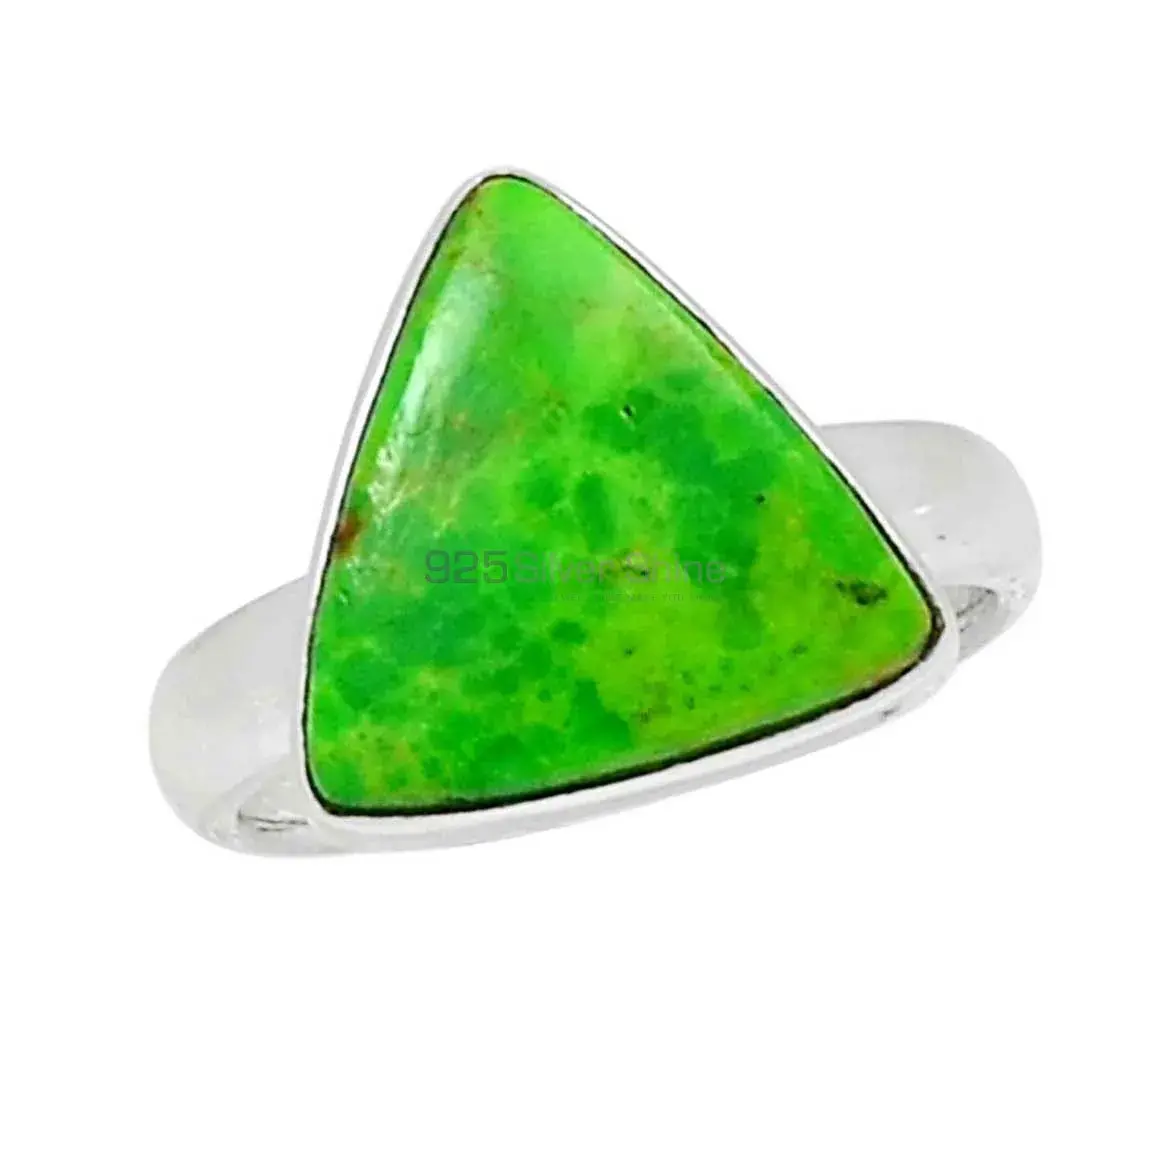 Natural Green Copper Turquoise Gemstone Ring In Sterling Silver Jewelry 925SR2300_0